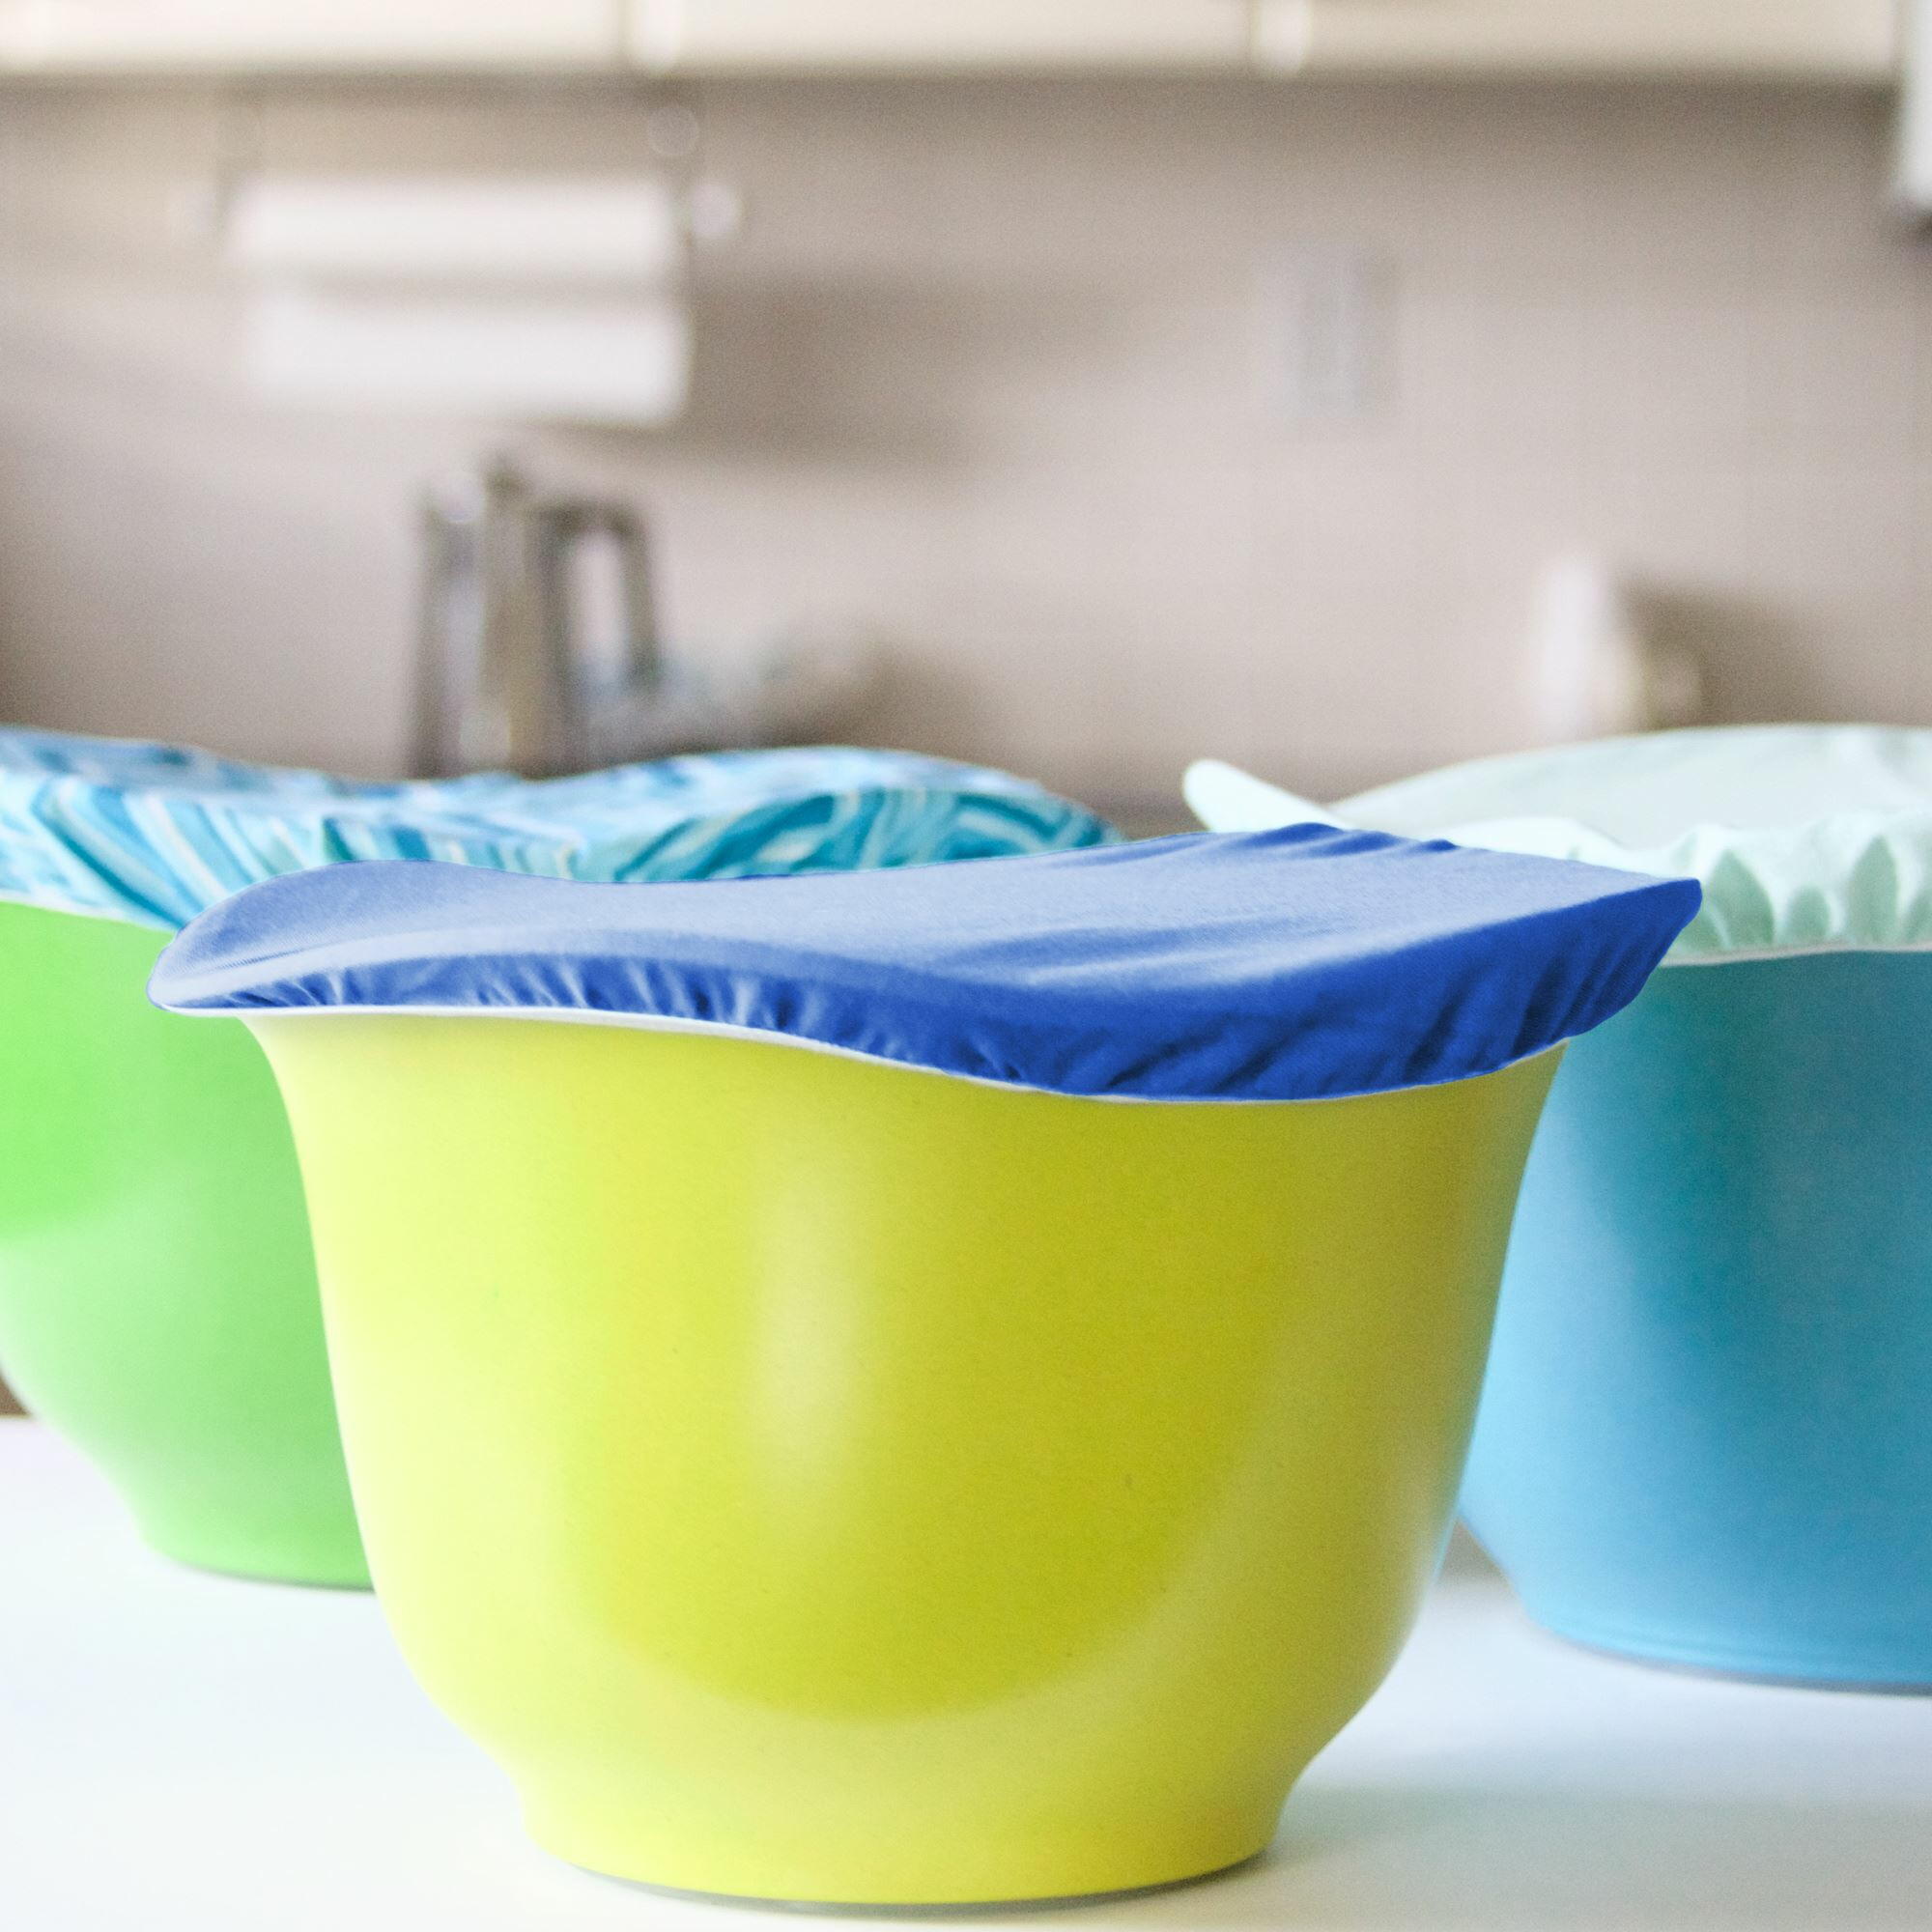 https://irepo.primecp.com/2022/12/544214/DIY-Reusable-Fabric-Bowl-Covers-new_UserCommentImage_ID-5028180.jpg?v=5028180